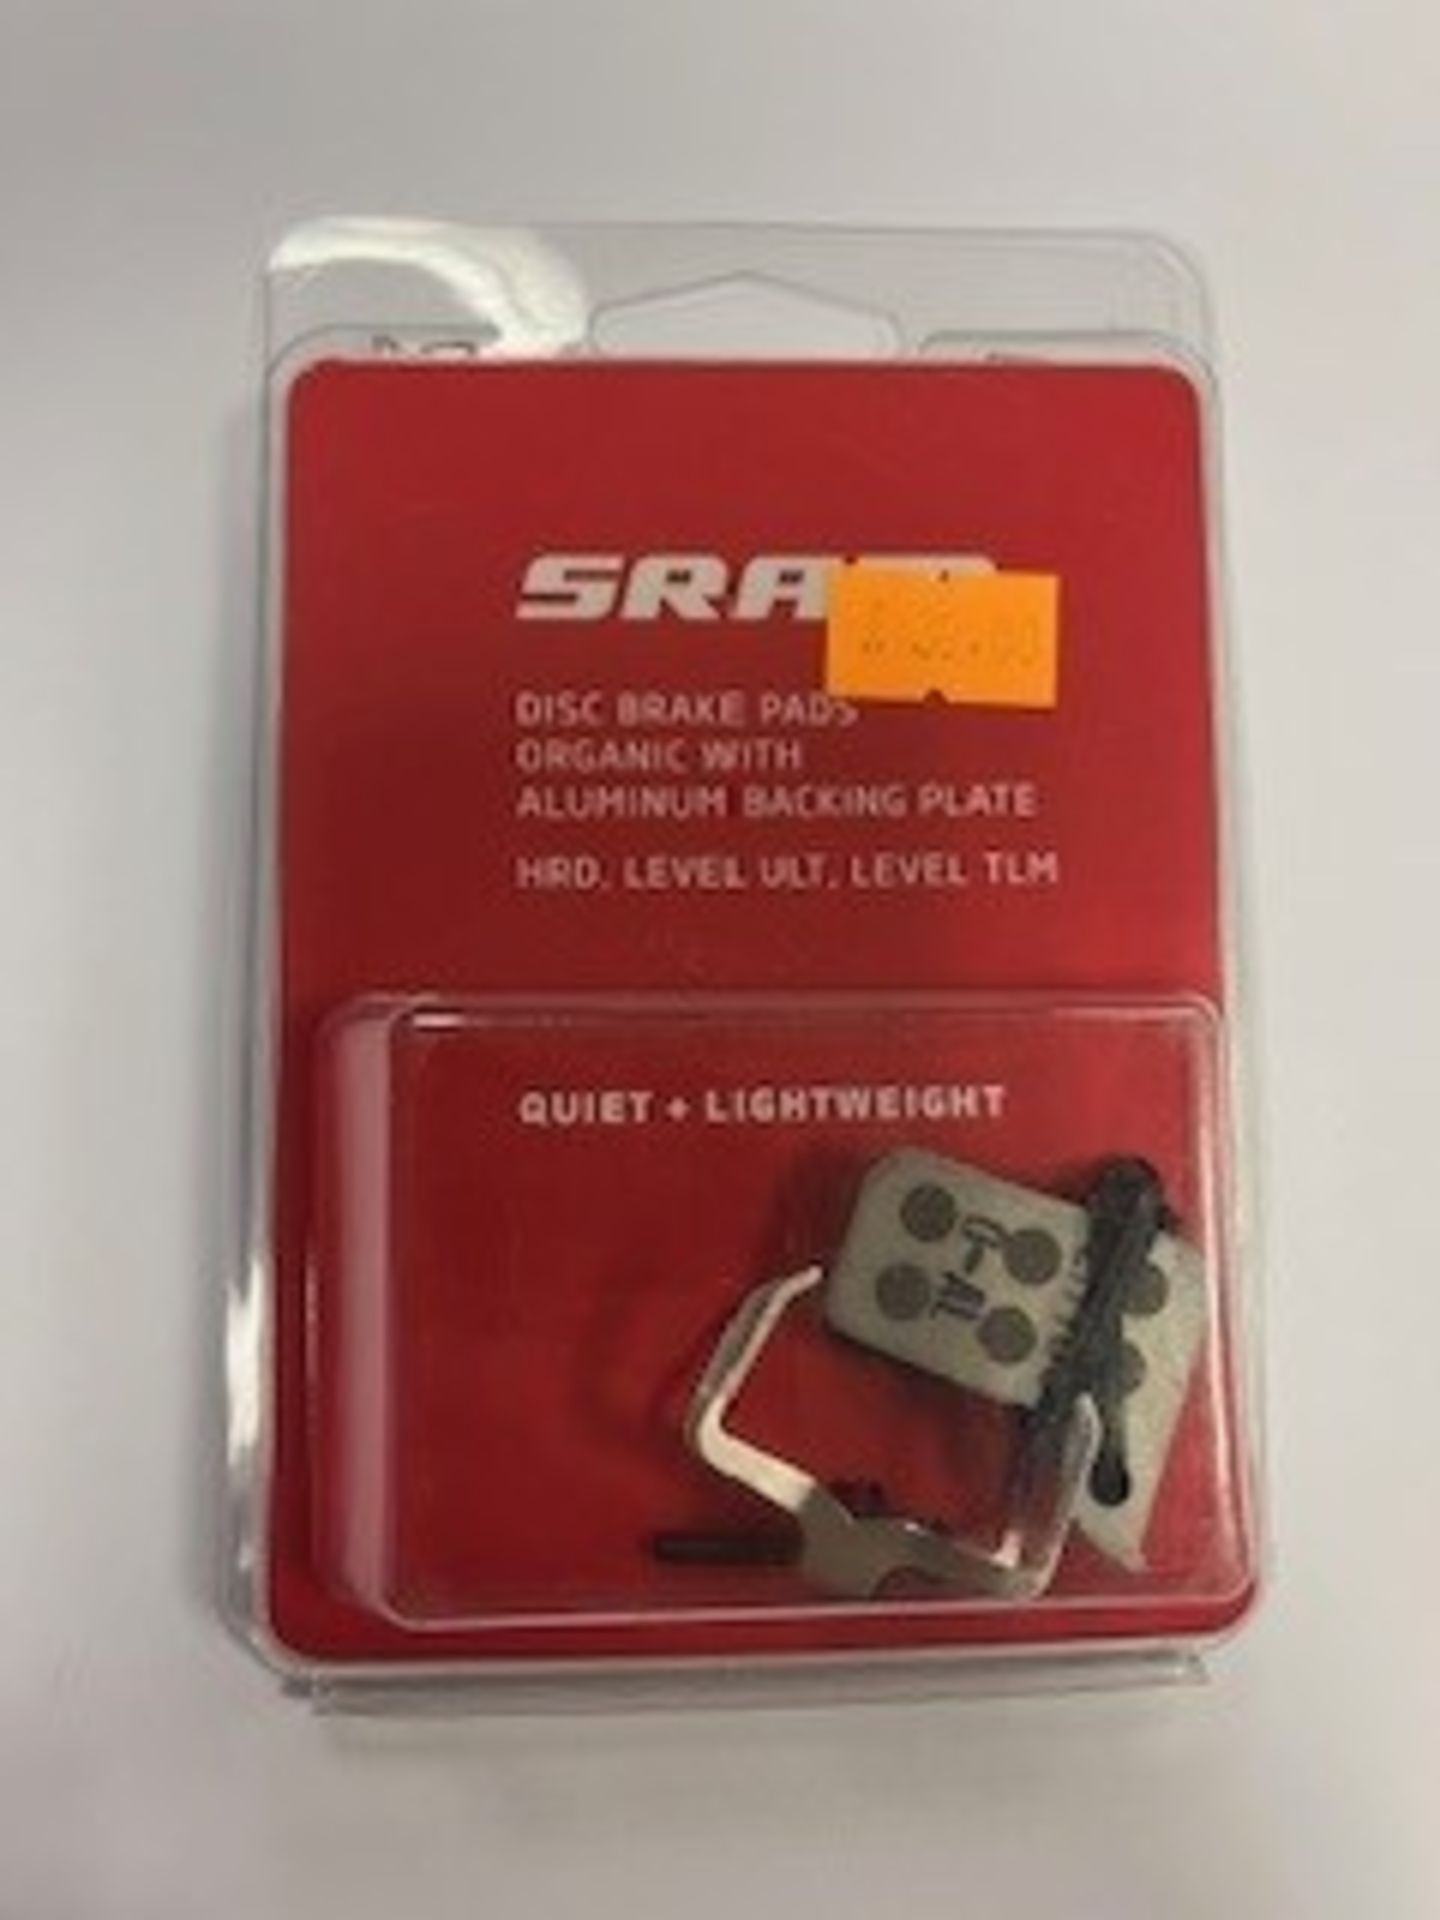 Sram Brake Pads to include 5x Disc Brake Pads Organic with Steel Backing Plate (HRD, LEVEL ULT, LEVE - Image 5 of 9